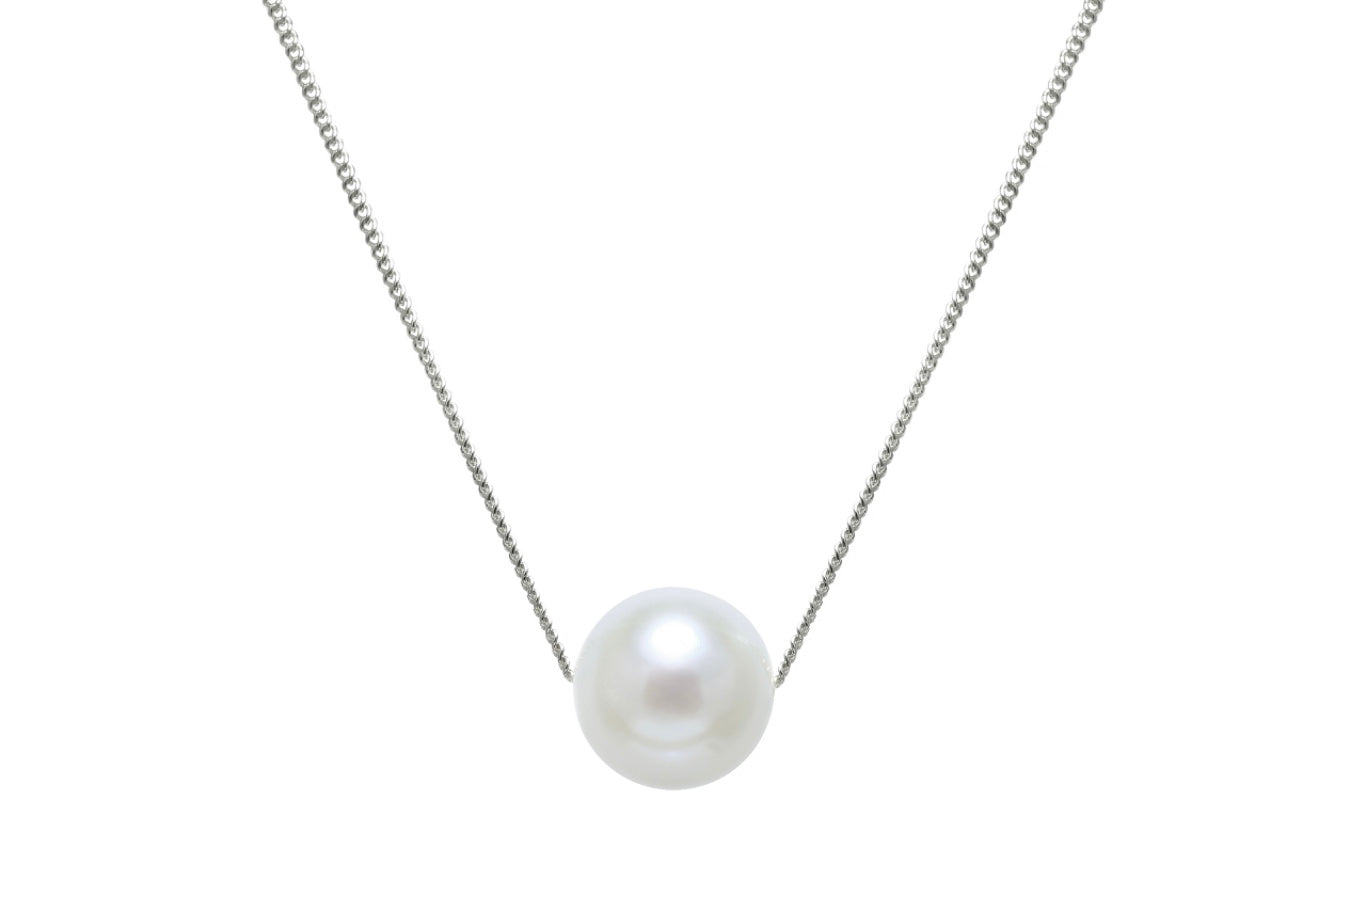 Silver white pearl floating necklace